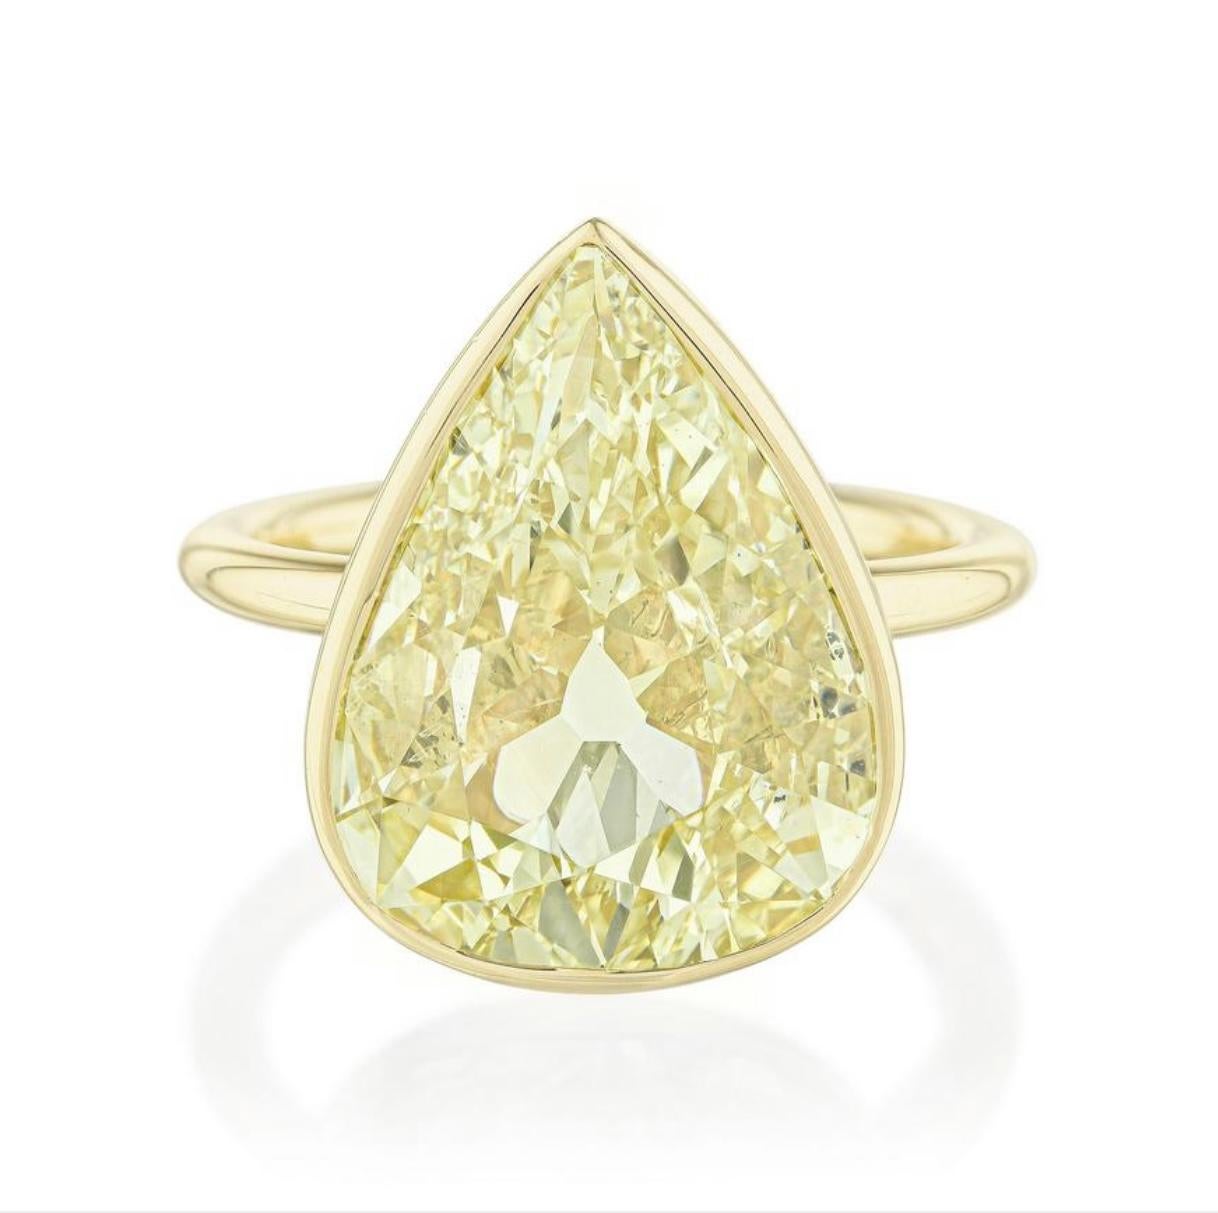 GIA certified Fancy yellow pear shape diamond ring in 18k yellow gold beautifully crafted in 18k yellow gold. 

The details are as follows : 
Pear shape diamond weight : 6.02 carats
Color : Fancy yellow 
Clarity : SI1 
Measurements :